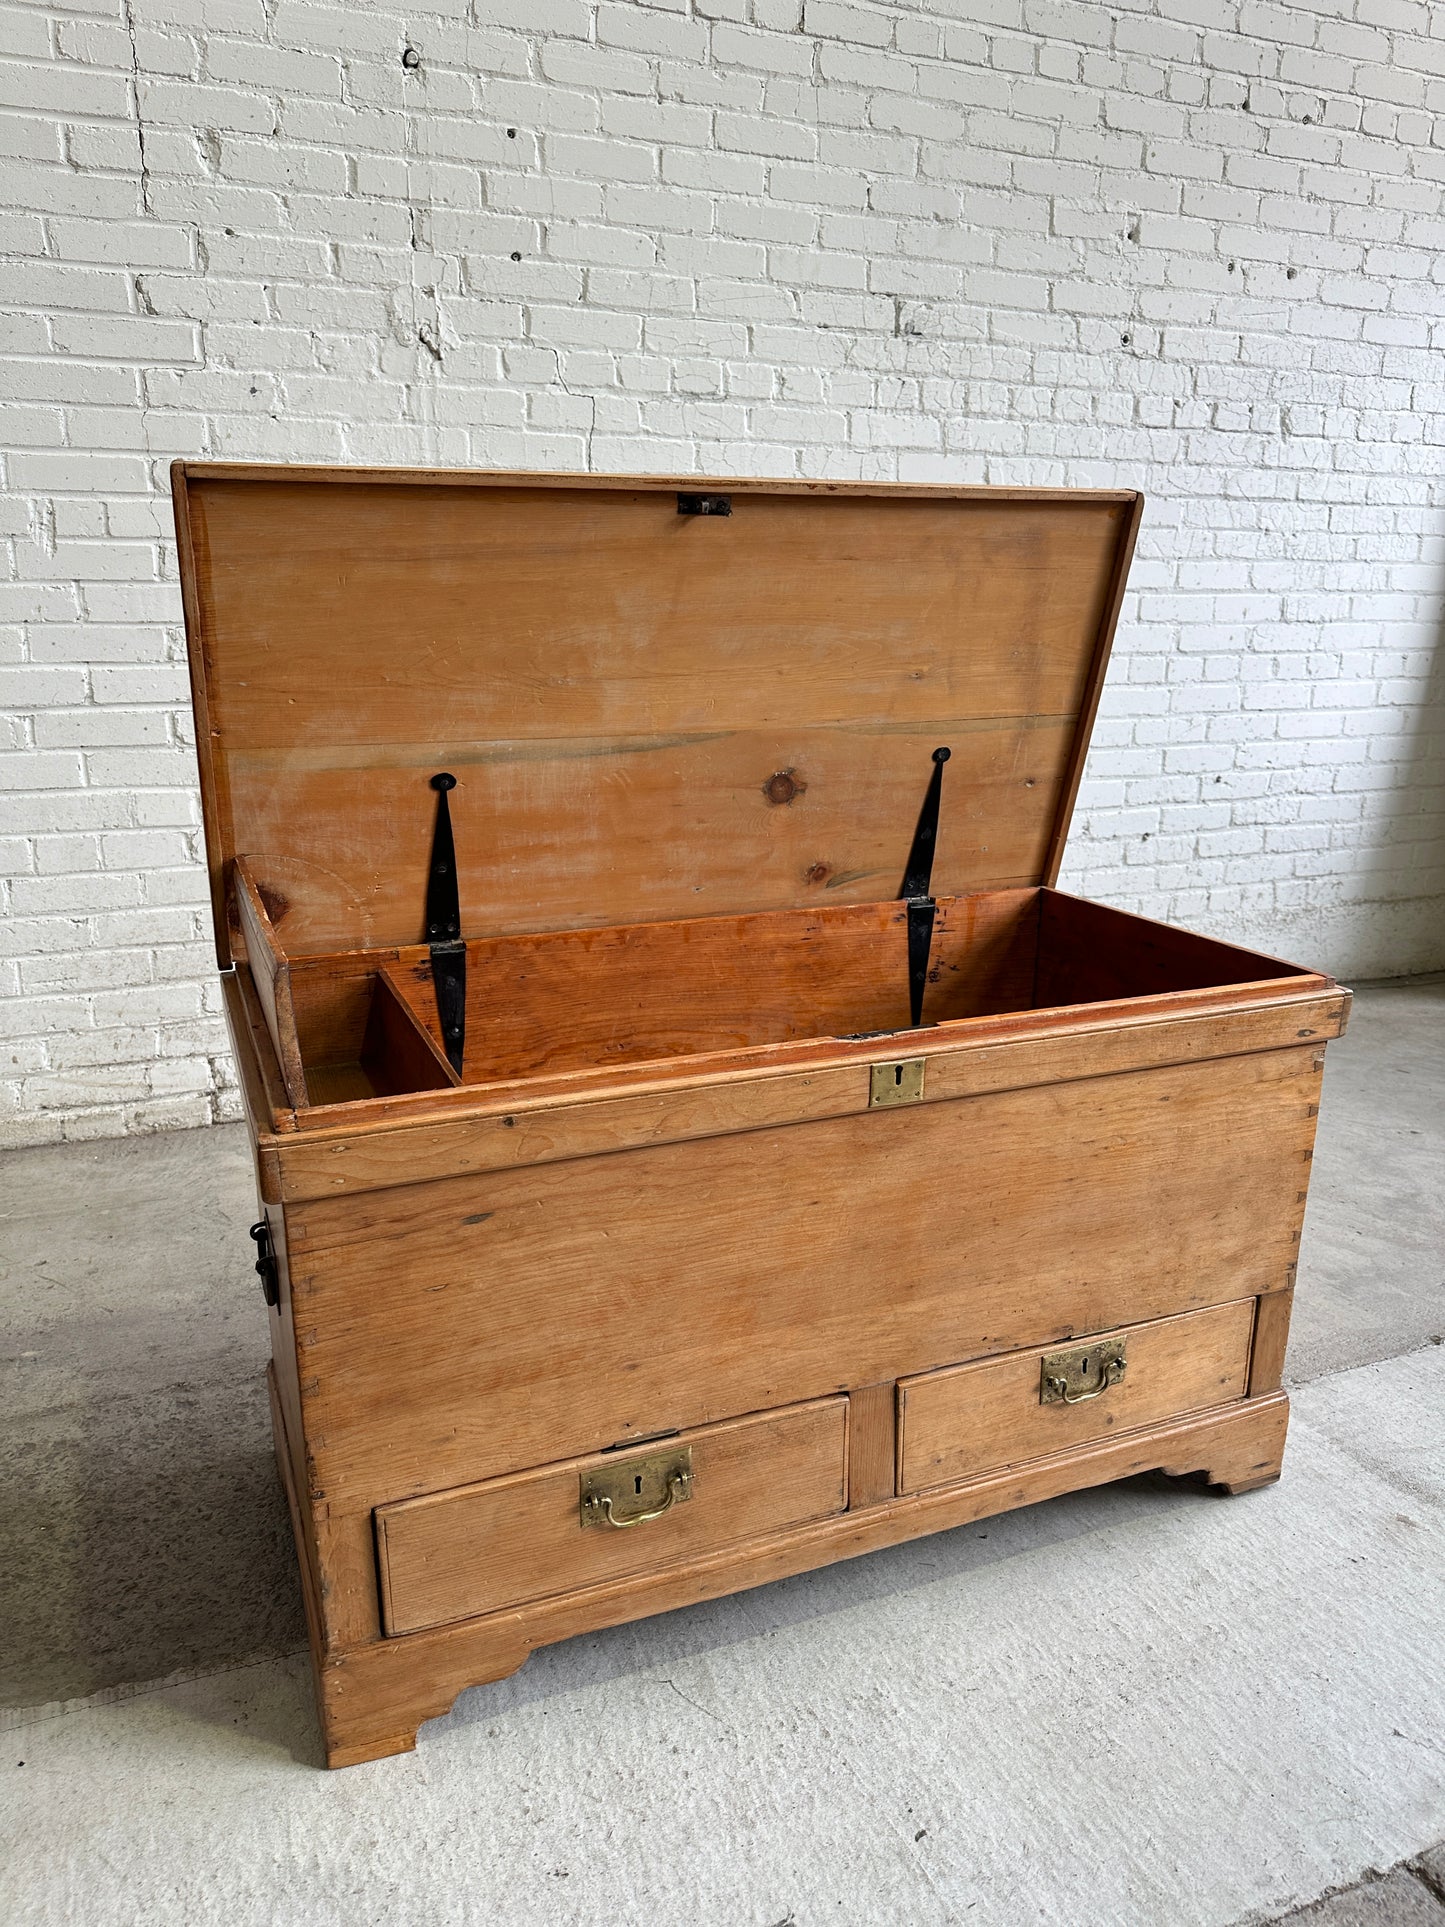 Antique Pine English Mule Chest with Brass Hardware c. 1860